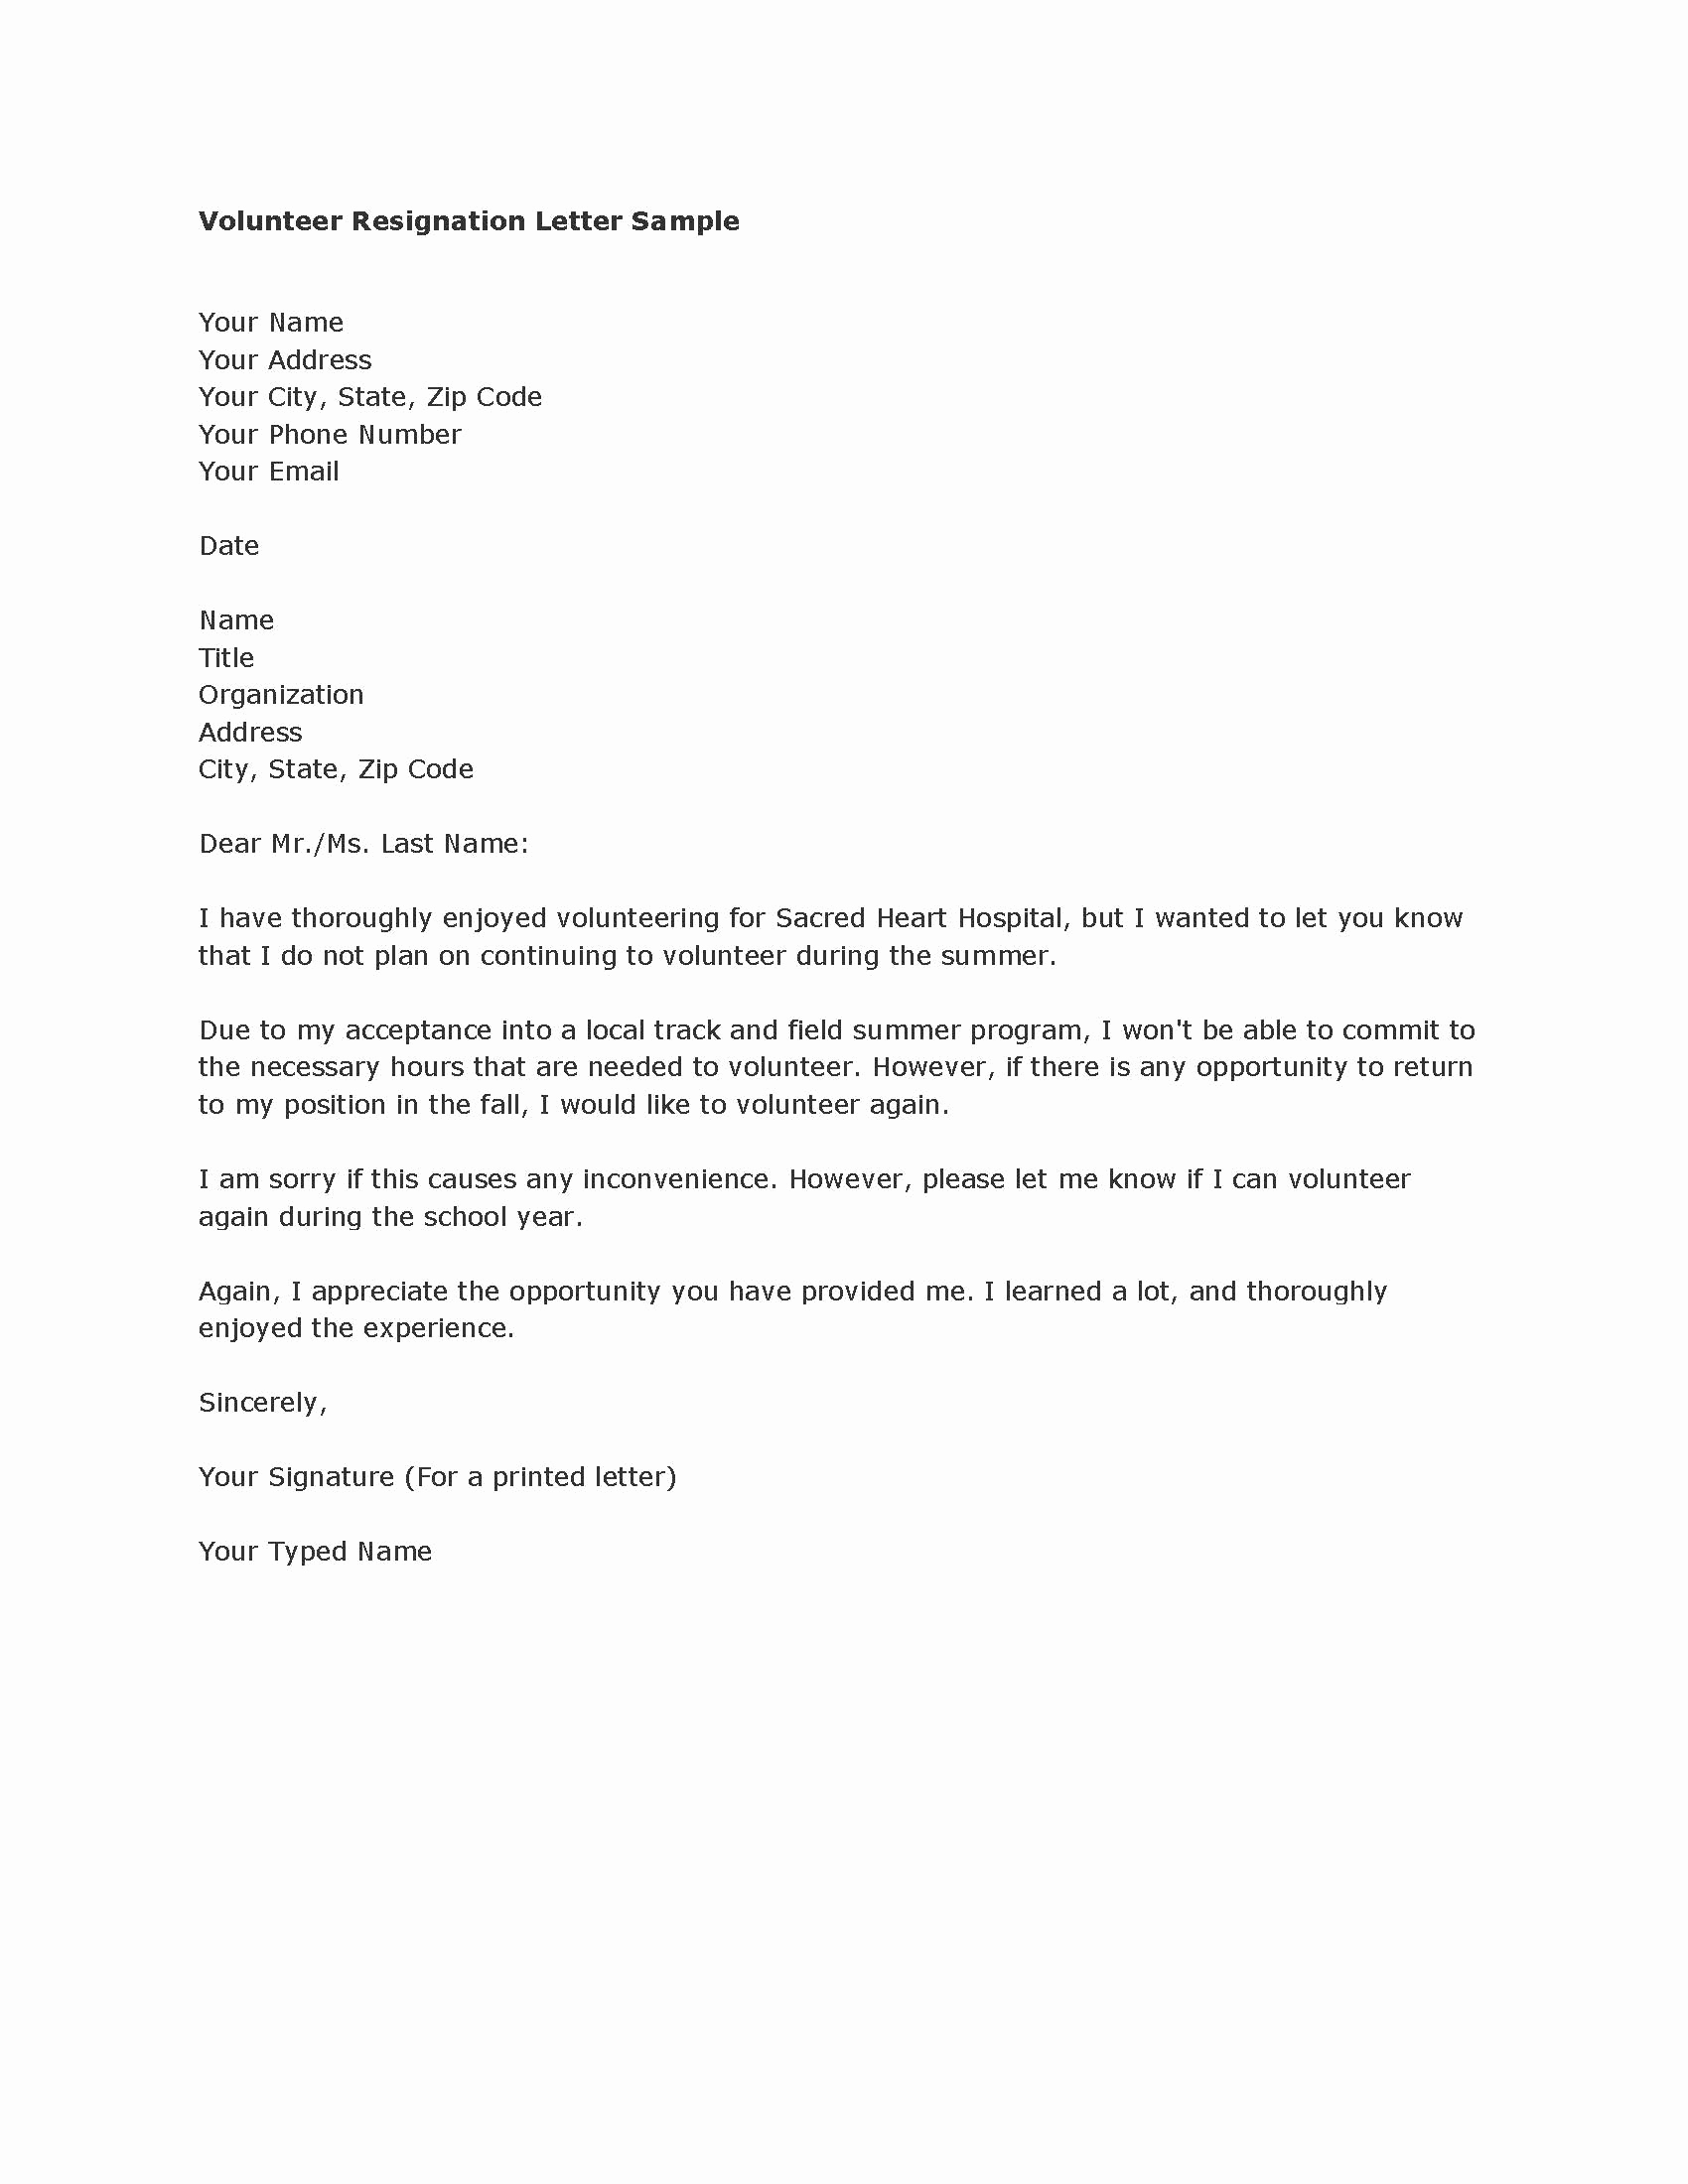 Template for Resignation Letter Awesome Resignation Letter